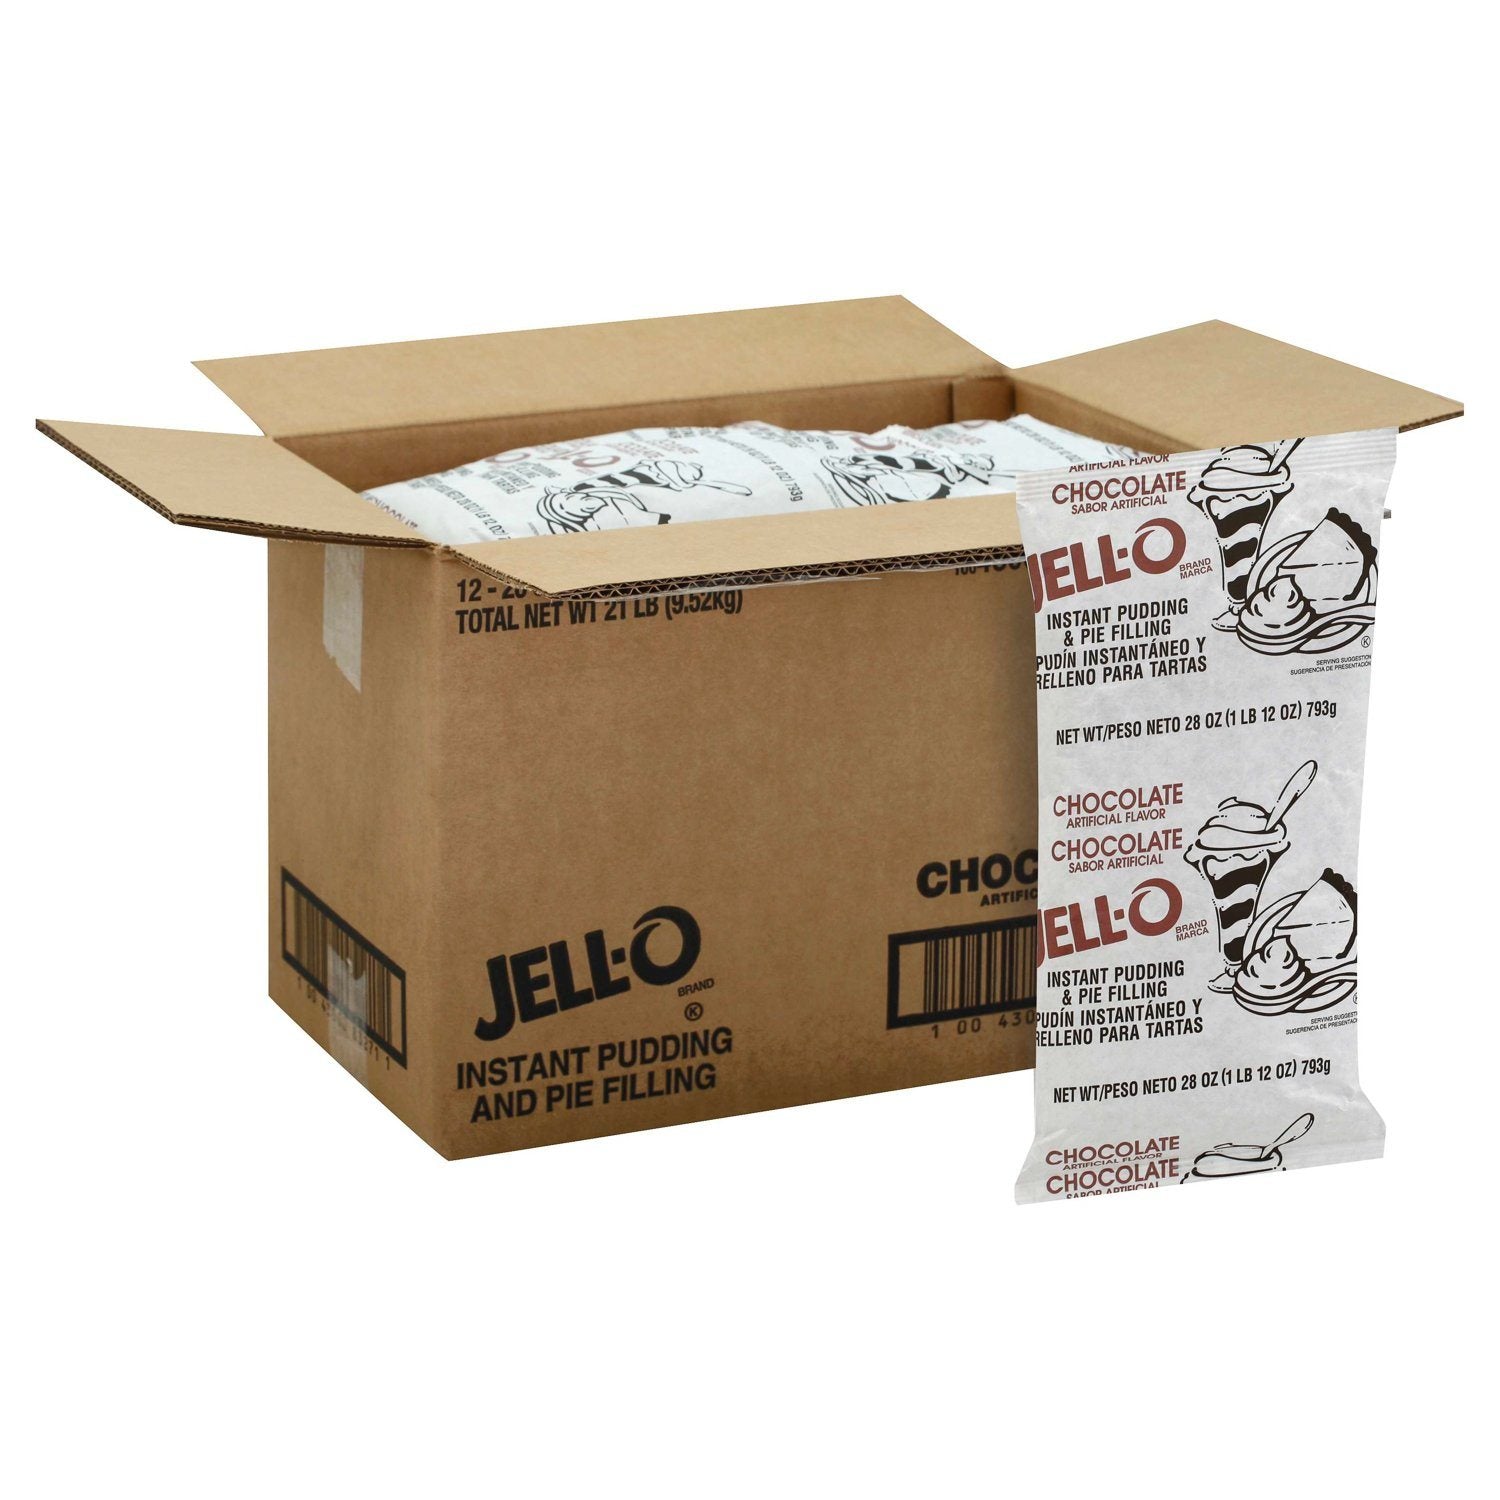 Jell-O Instant Pudding & Pie Filling Mixes Jell-O Chocolate 1.75 lb-12 Count 